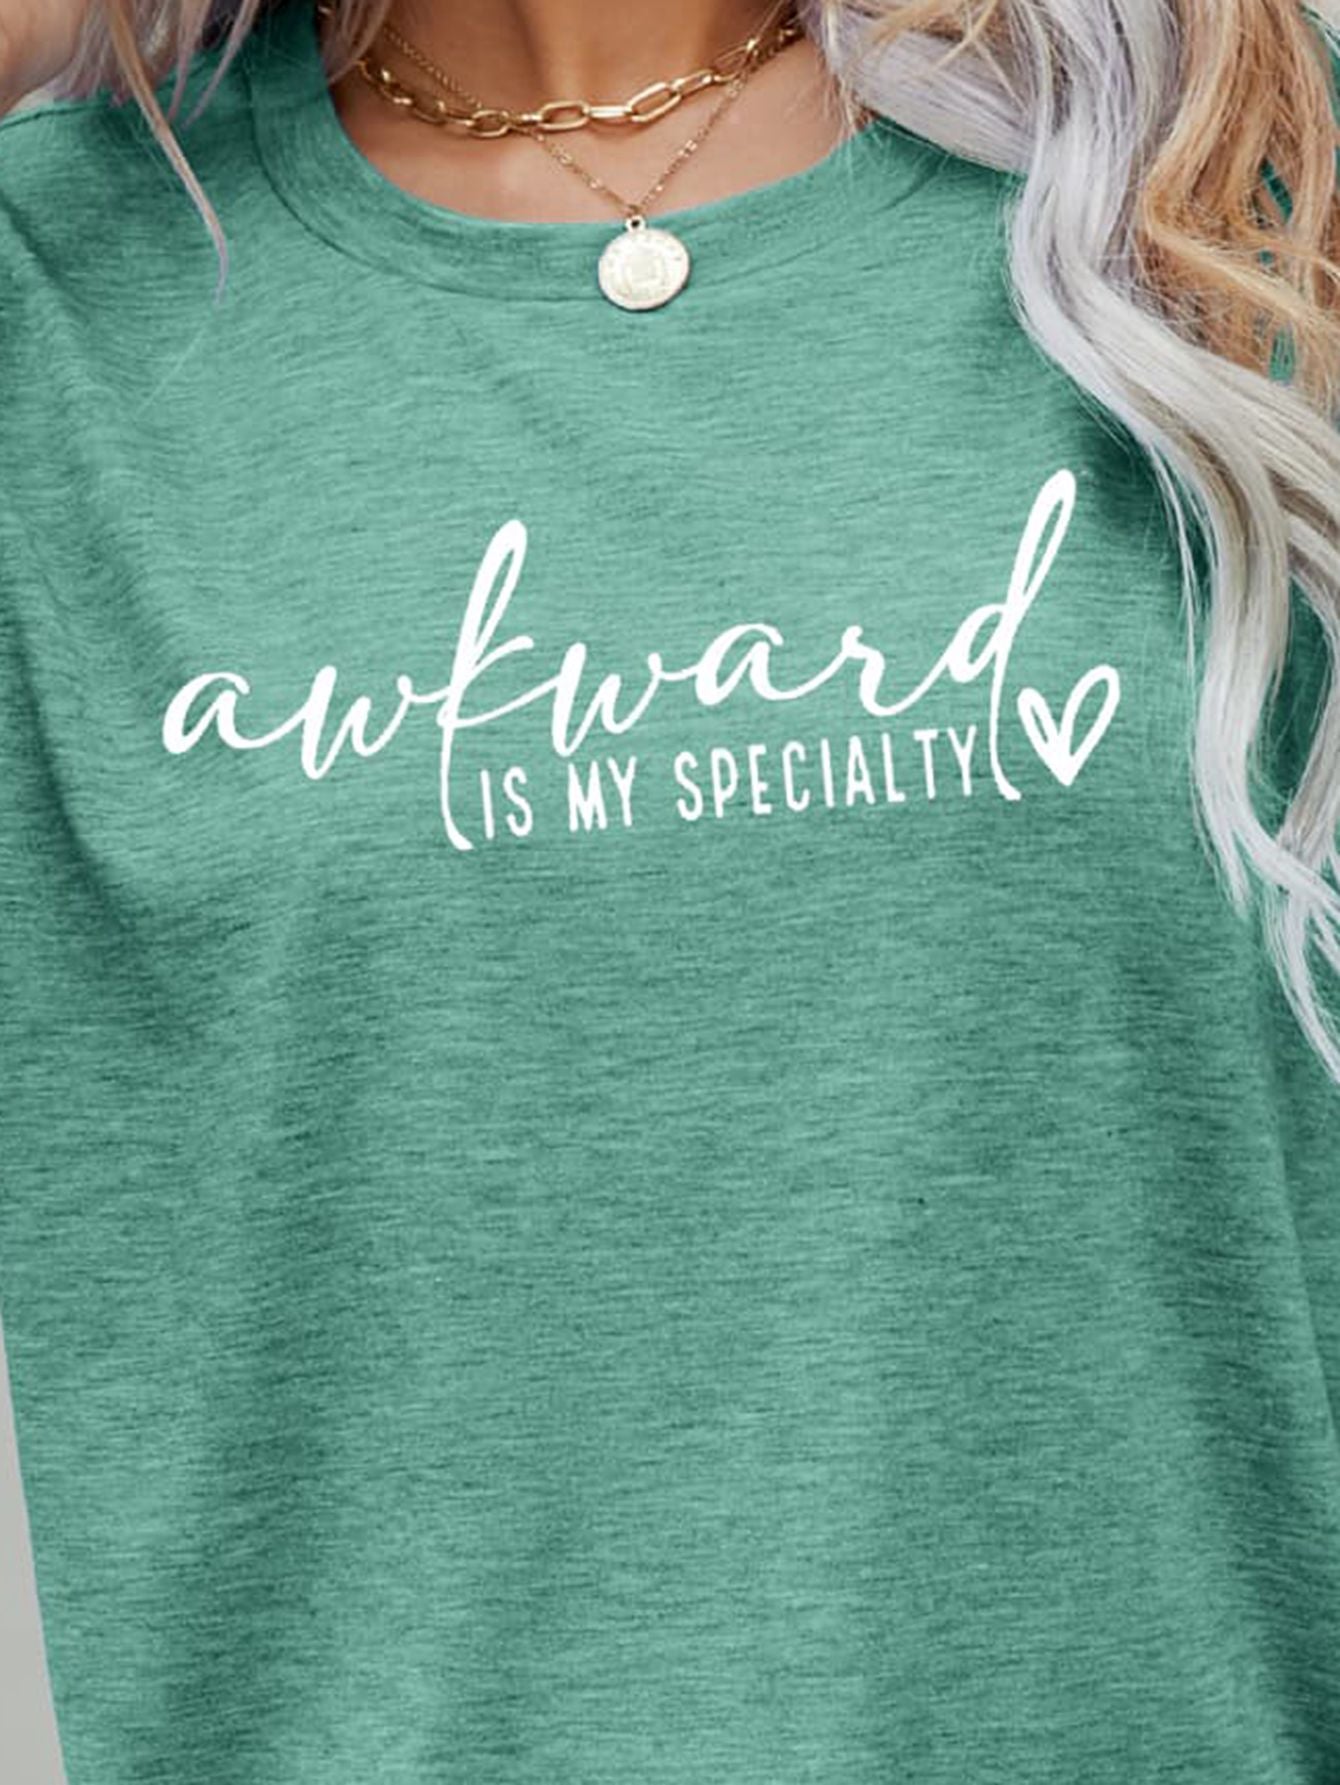 AWKWARD IS MY SPECIALTY Graphic Tee - T-Shirts - Shirts & Tops - 12 - 2024